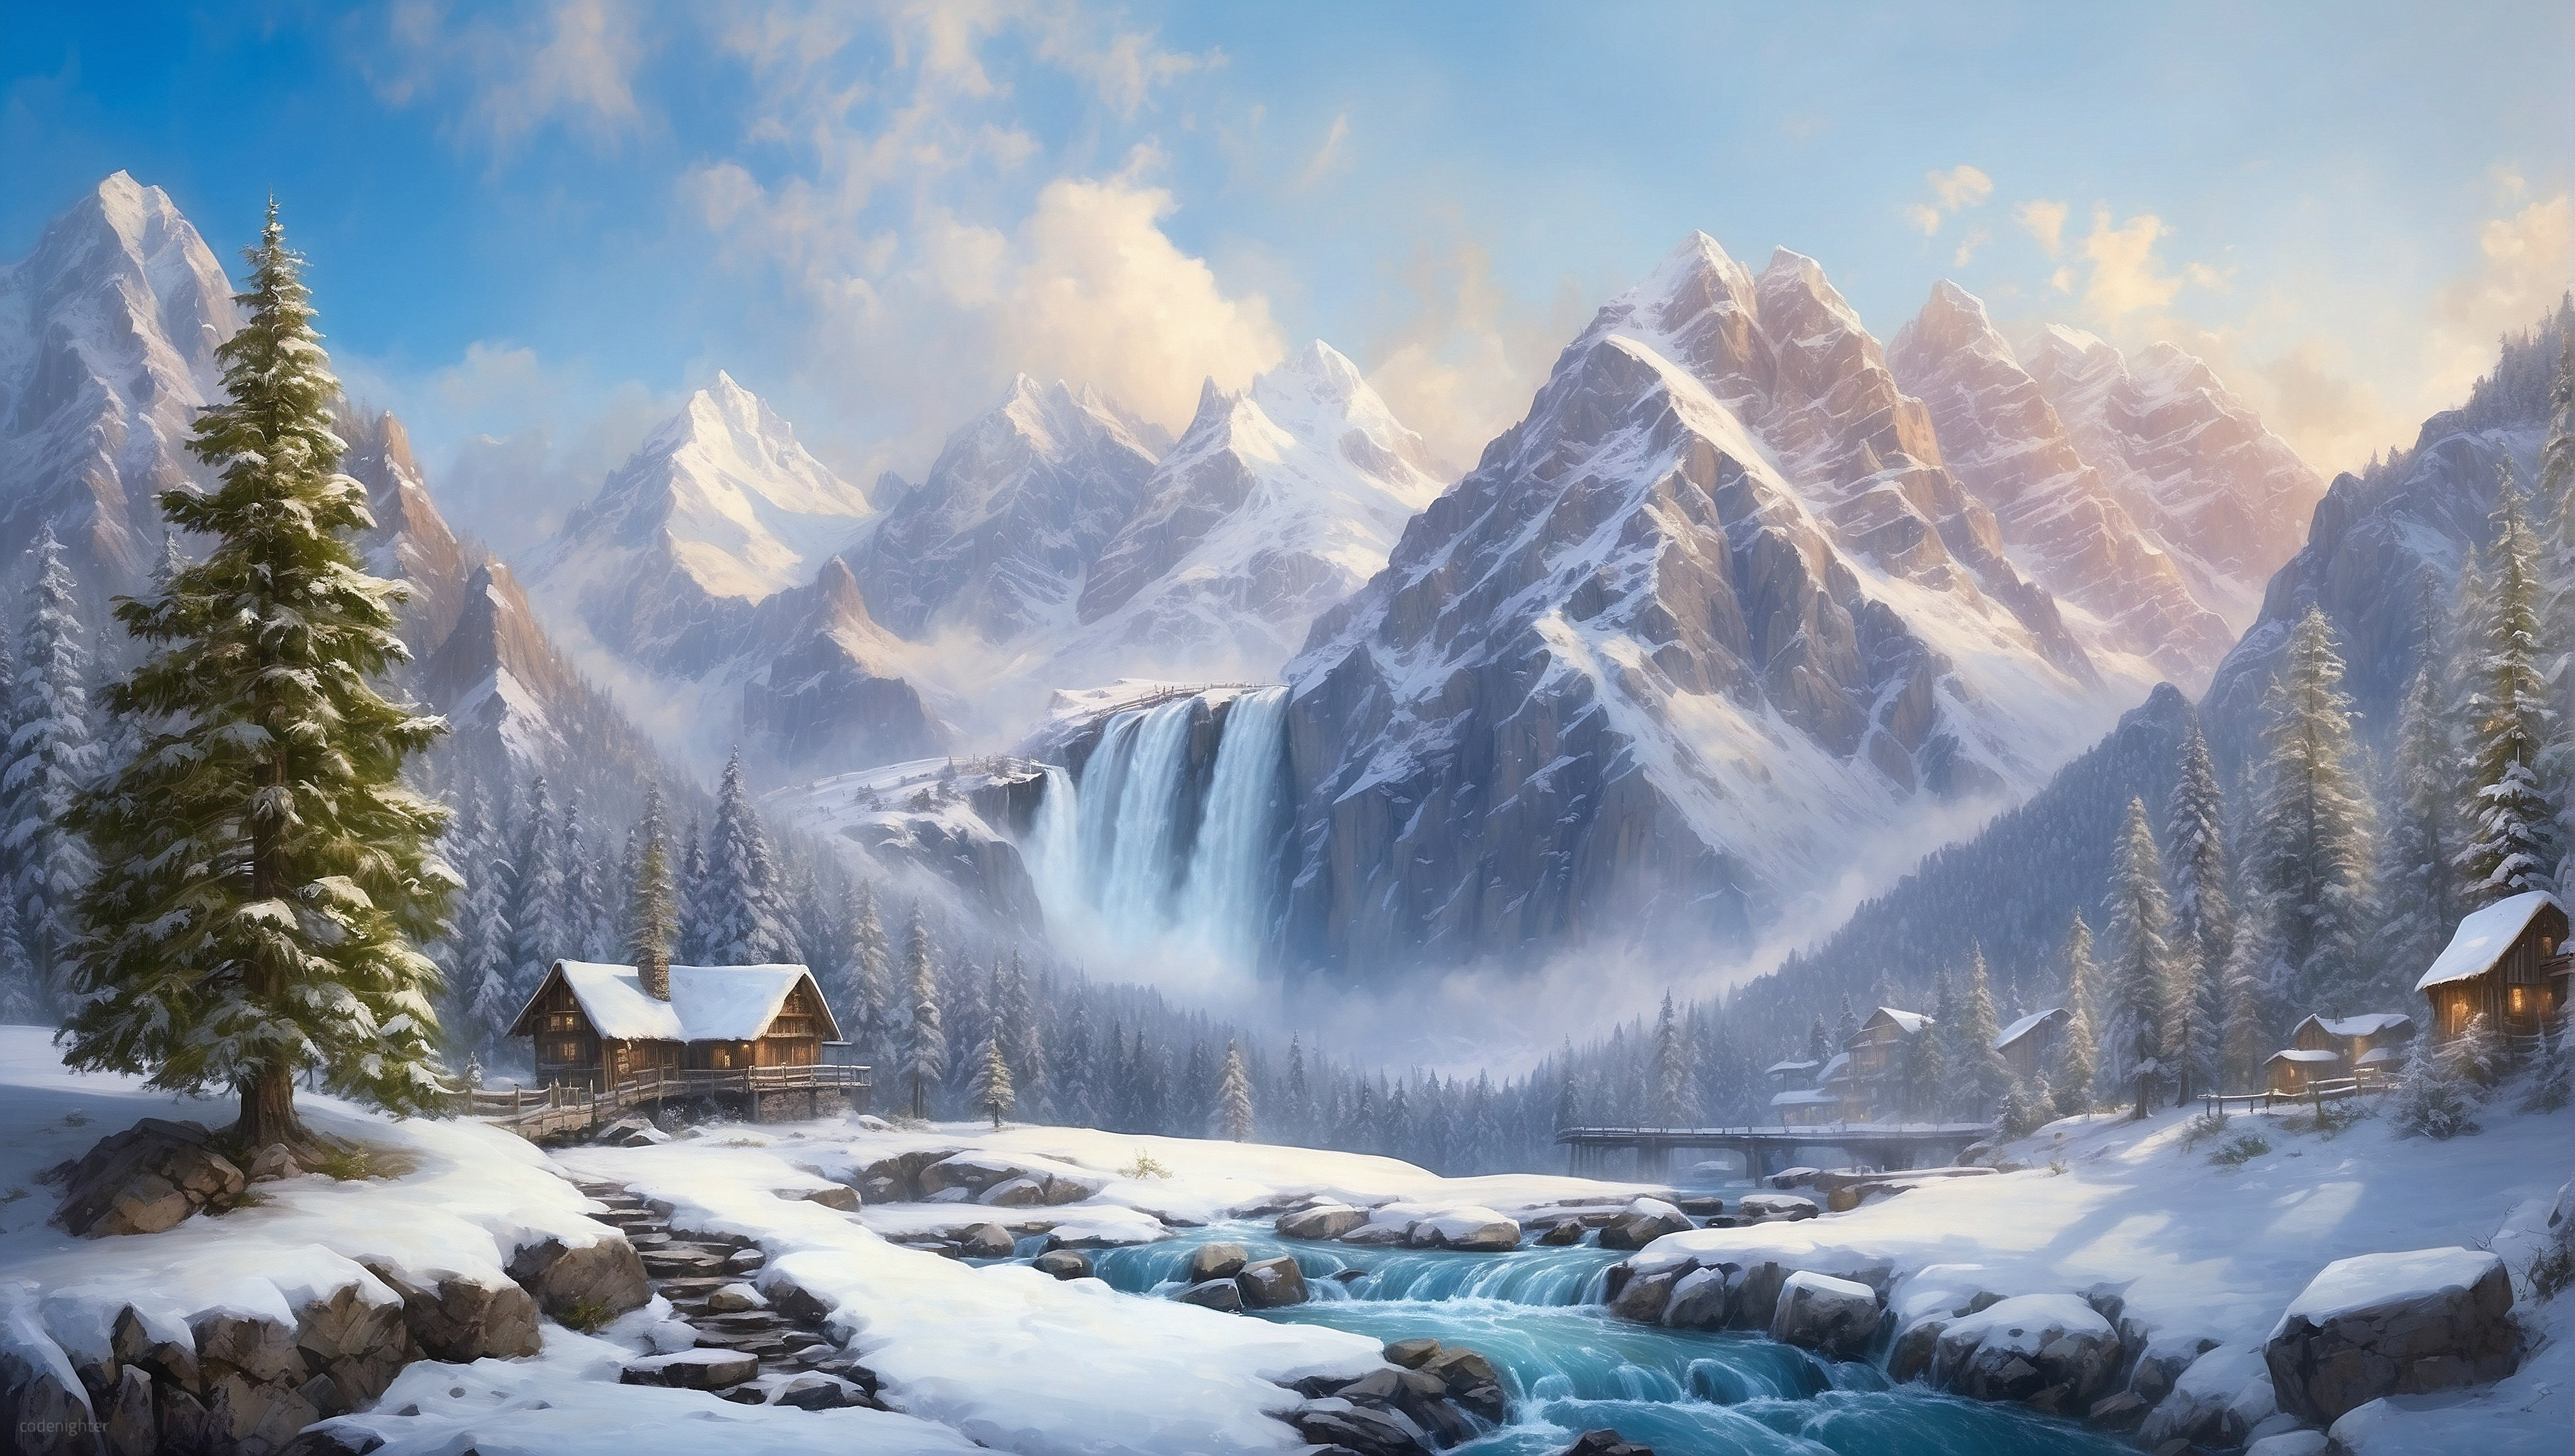 General 4526x2560 AI art digital art digital painting landscape winter mountains forest trees sky clouds snow covered sunlight snowy mountain outdoors log cabin water river rocks waterfall snow